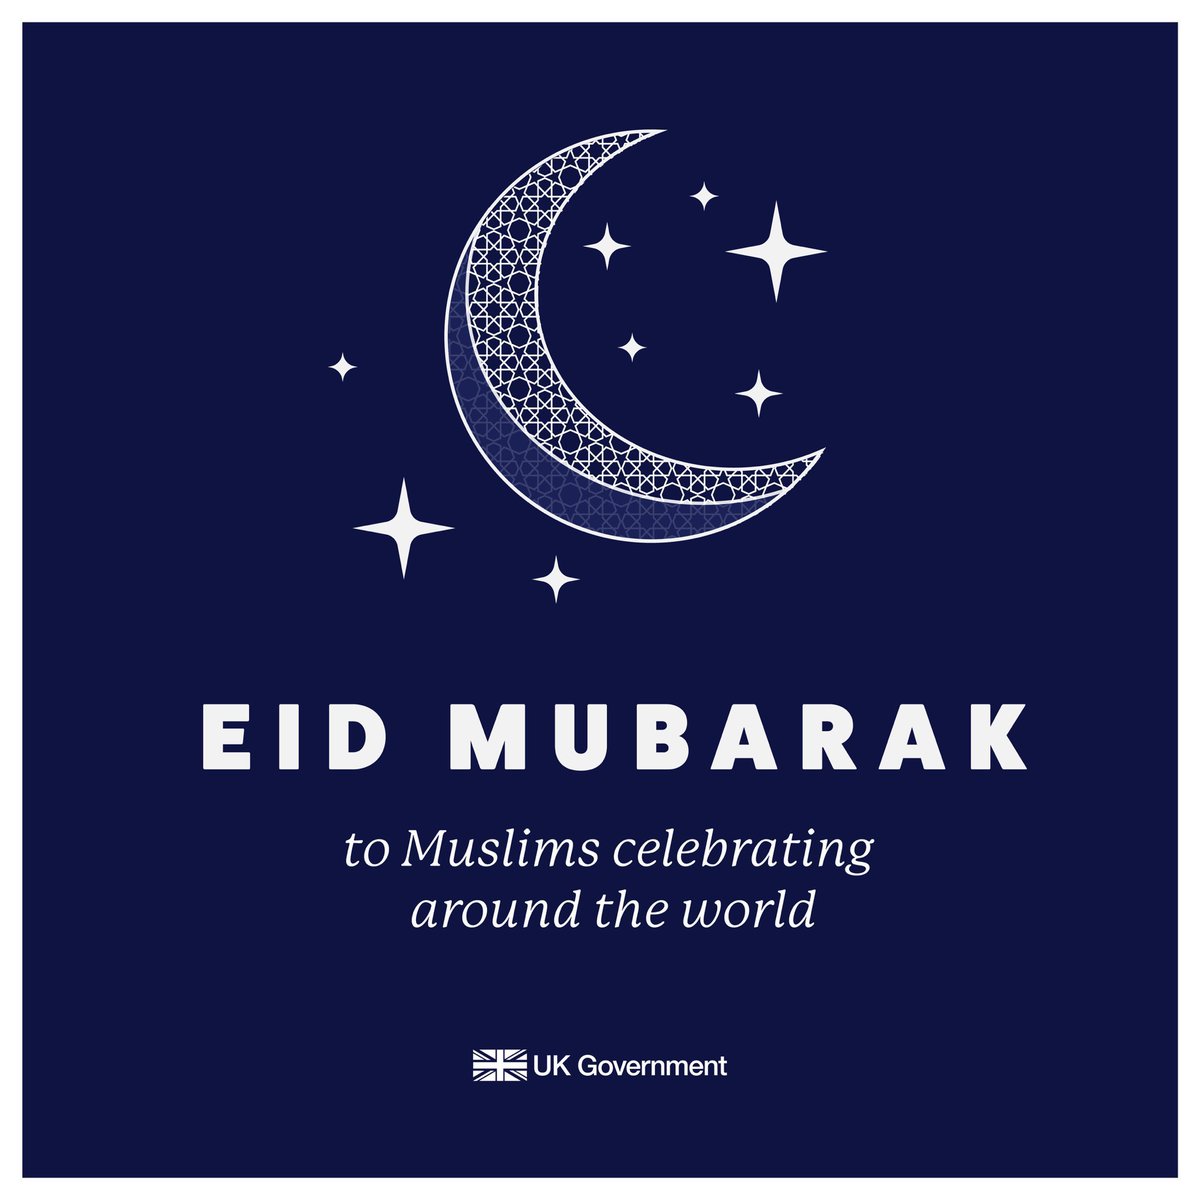 To all our Muslim friends and colleagues, wishing you a happy Eid Mubarak from Kampala….